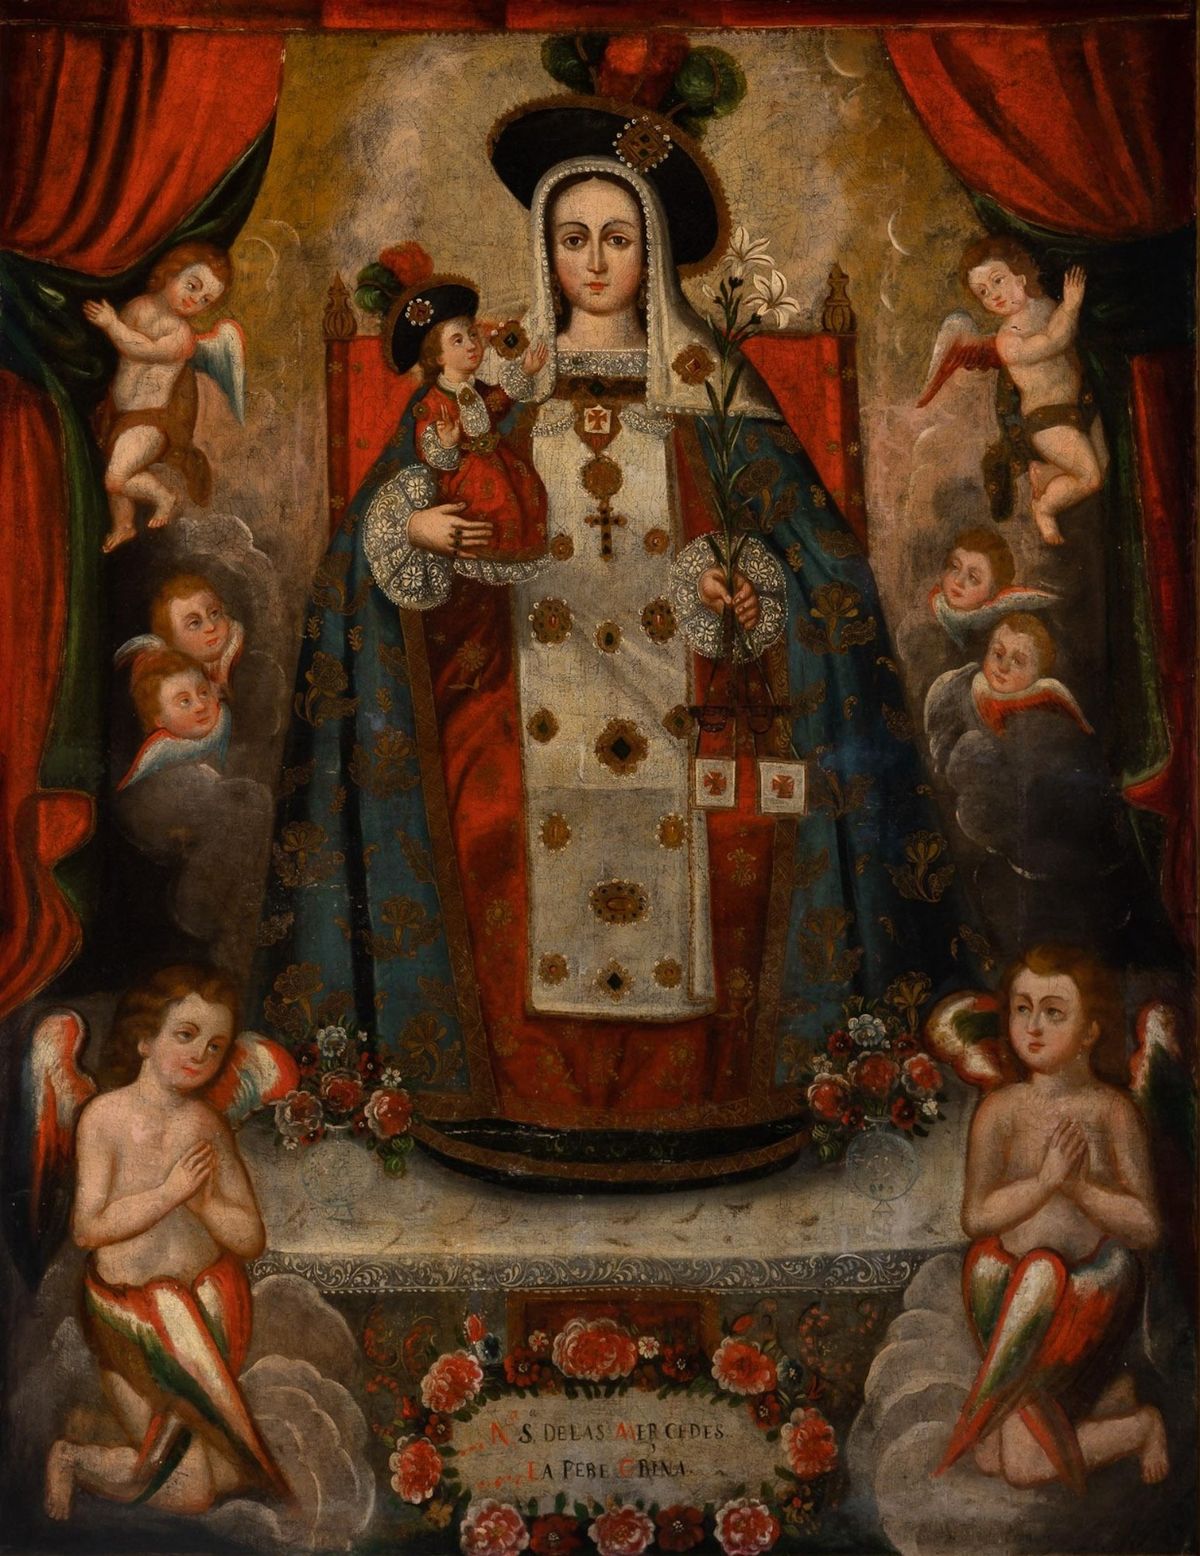 The recovered painting The Pilgrim Virgin Courtesy the Manhattan District Attorney's Office